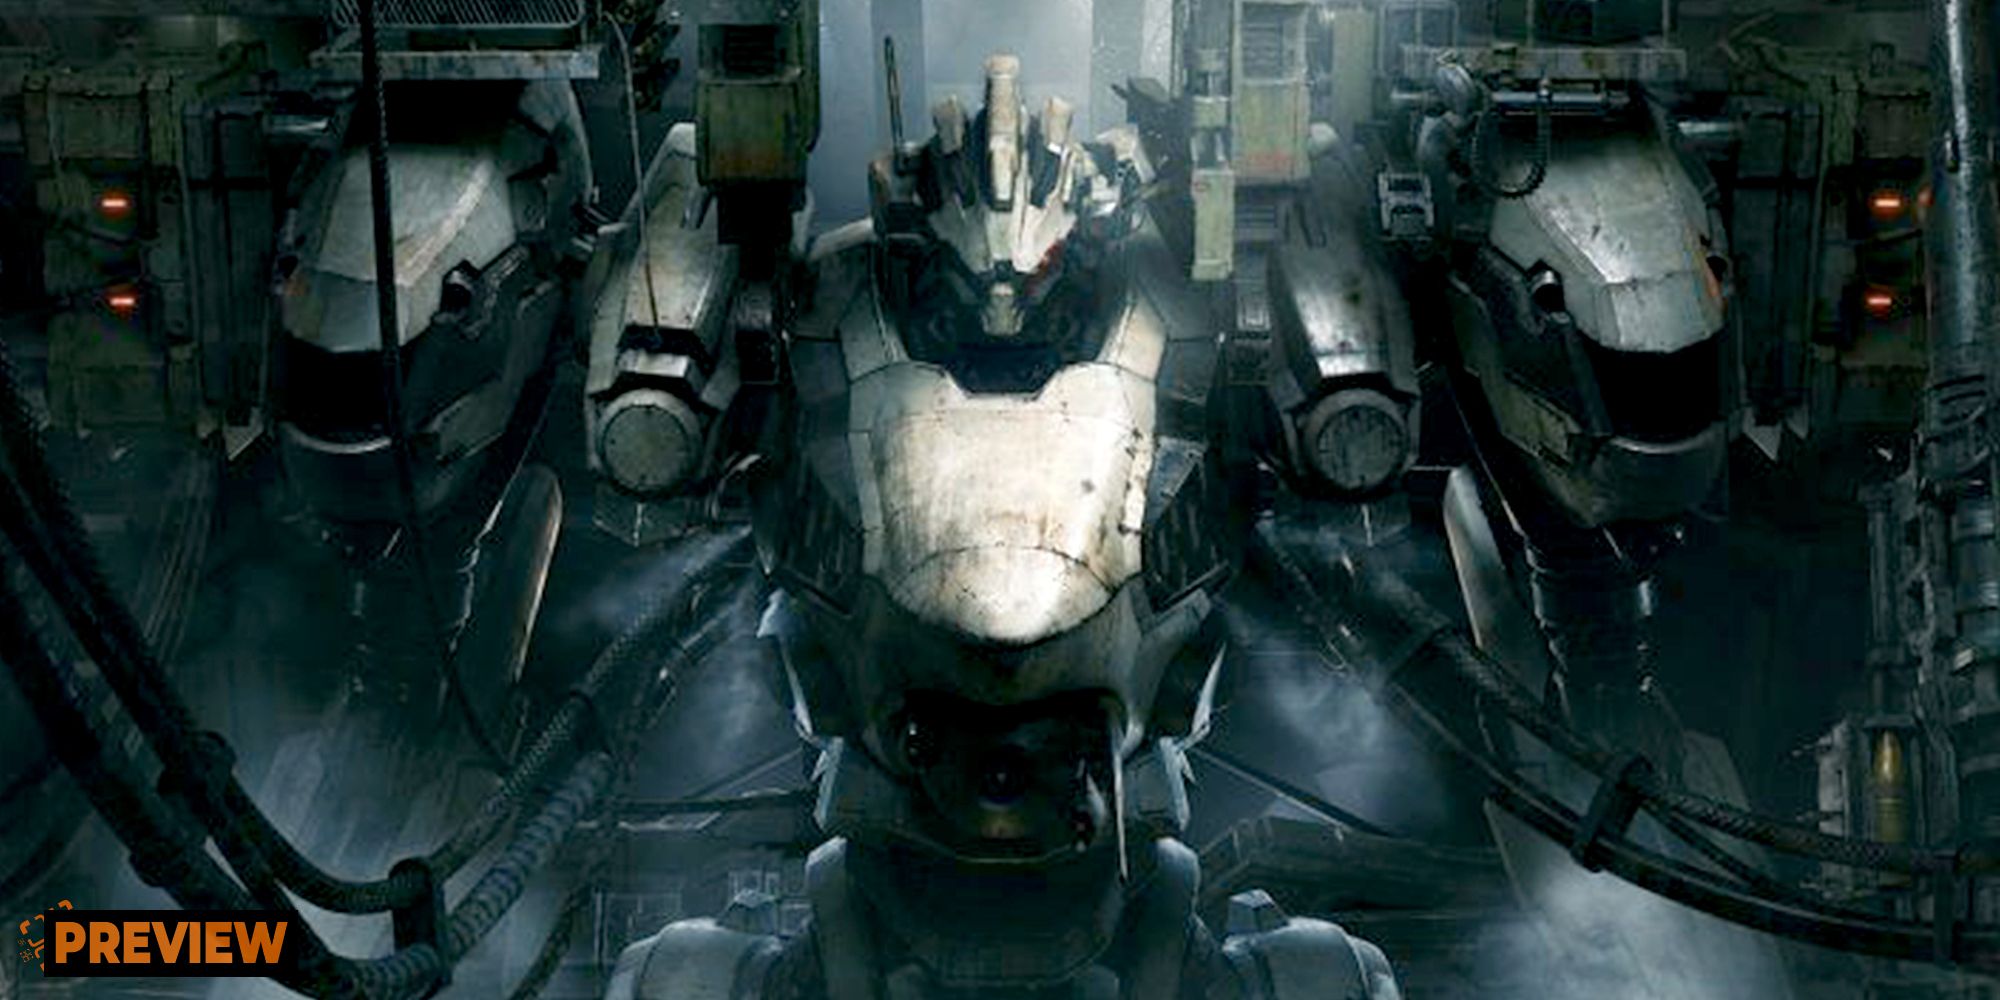 Armored Core 6 Physical Discs Leak Ahead of Media Embargo - Insider Gaming